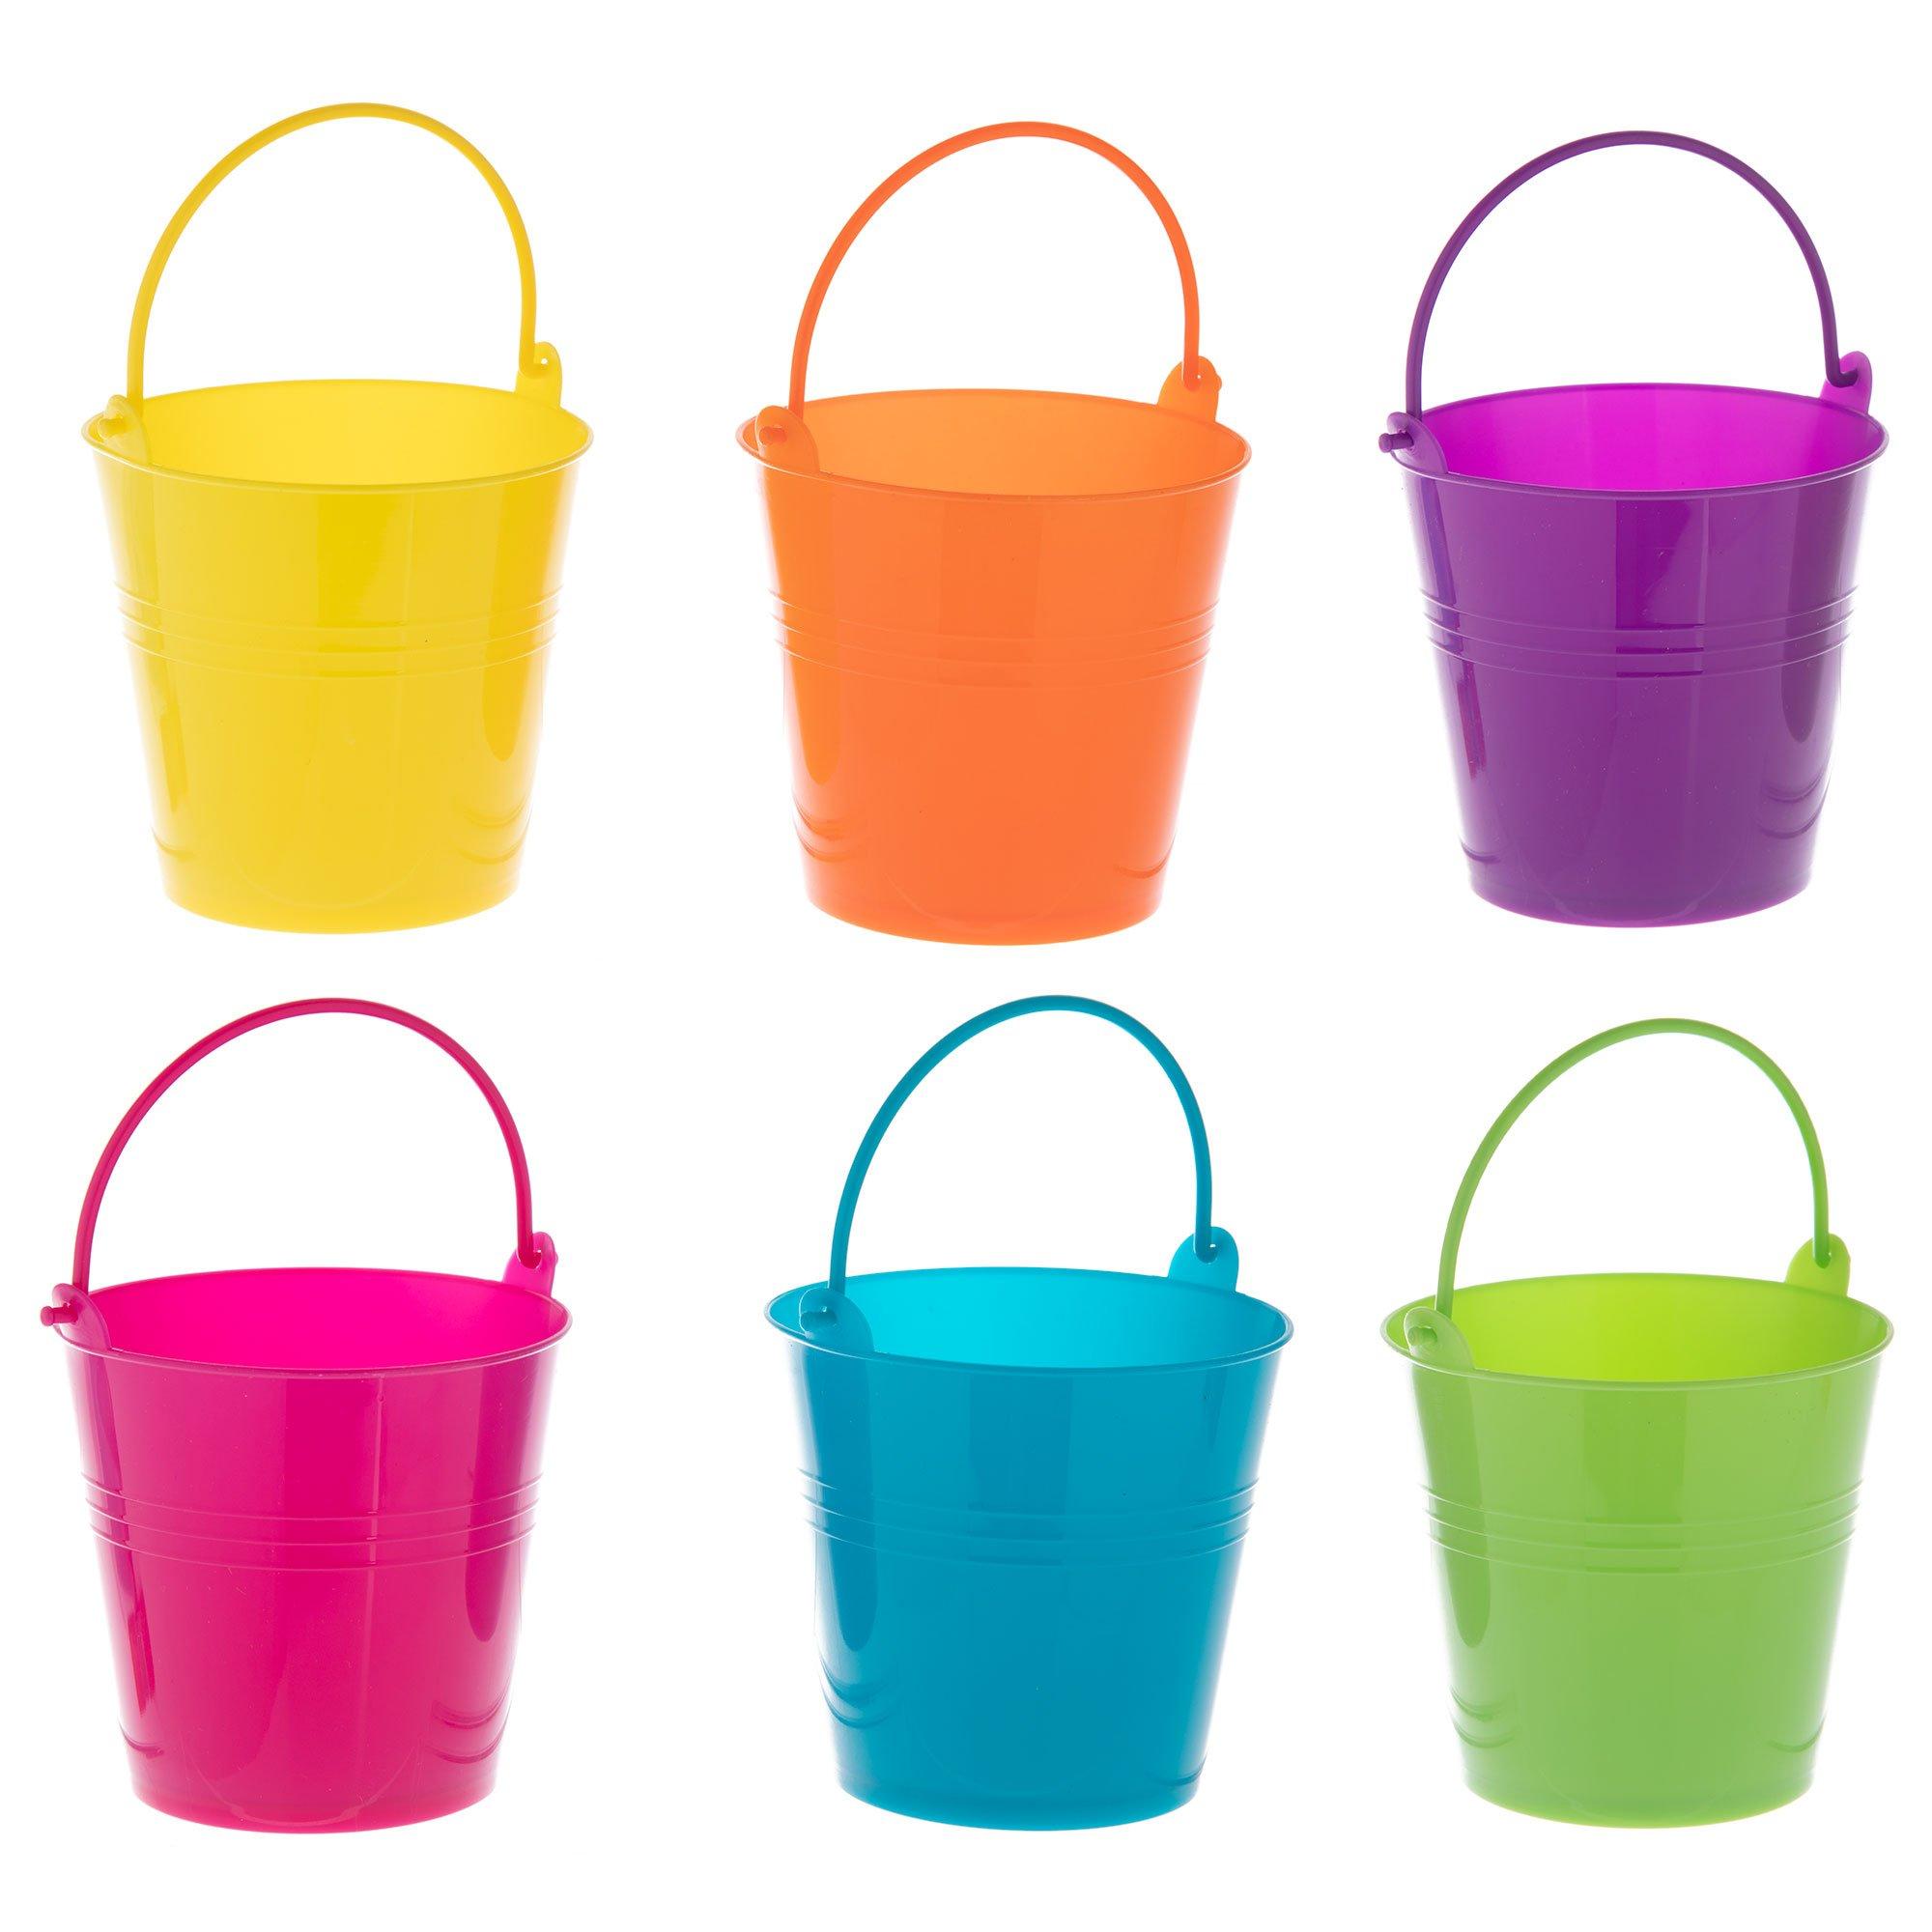 6 Pack Mini Buckets for Kids Party Favors, Small Colorful Metal